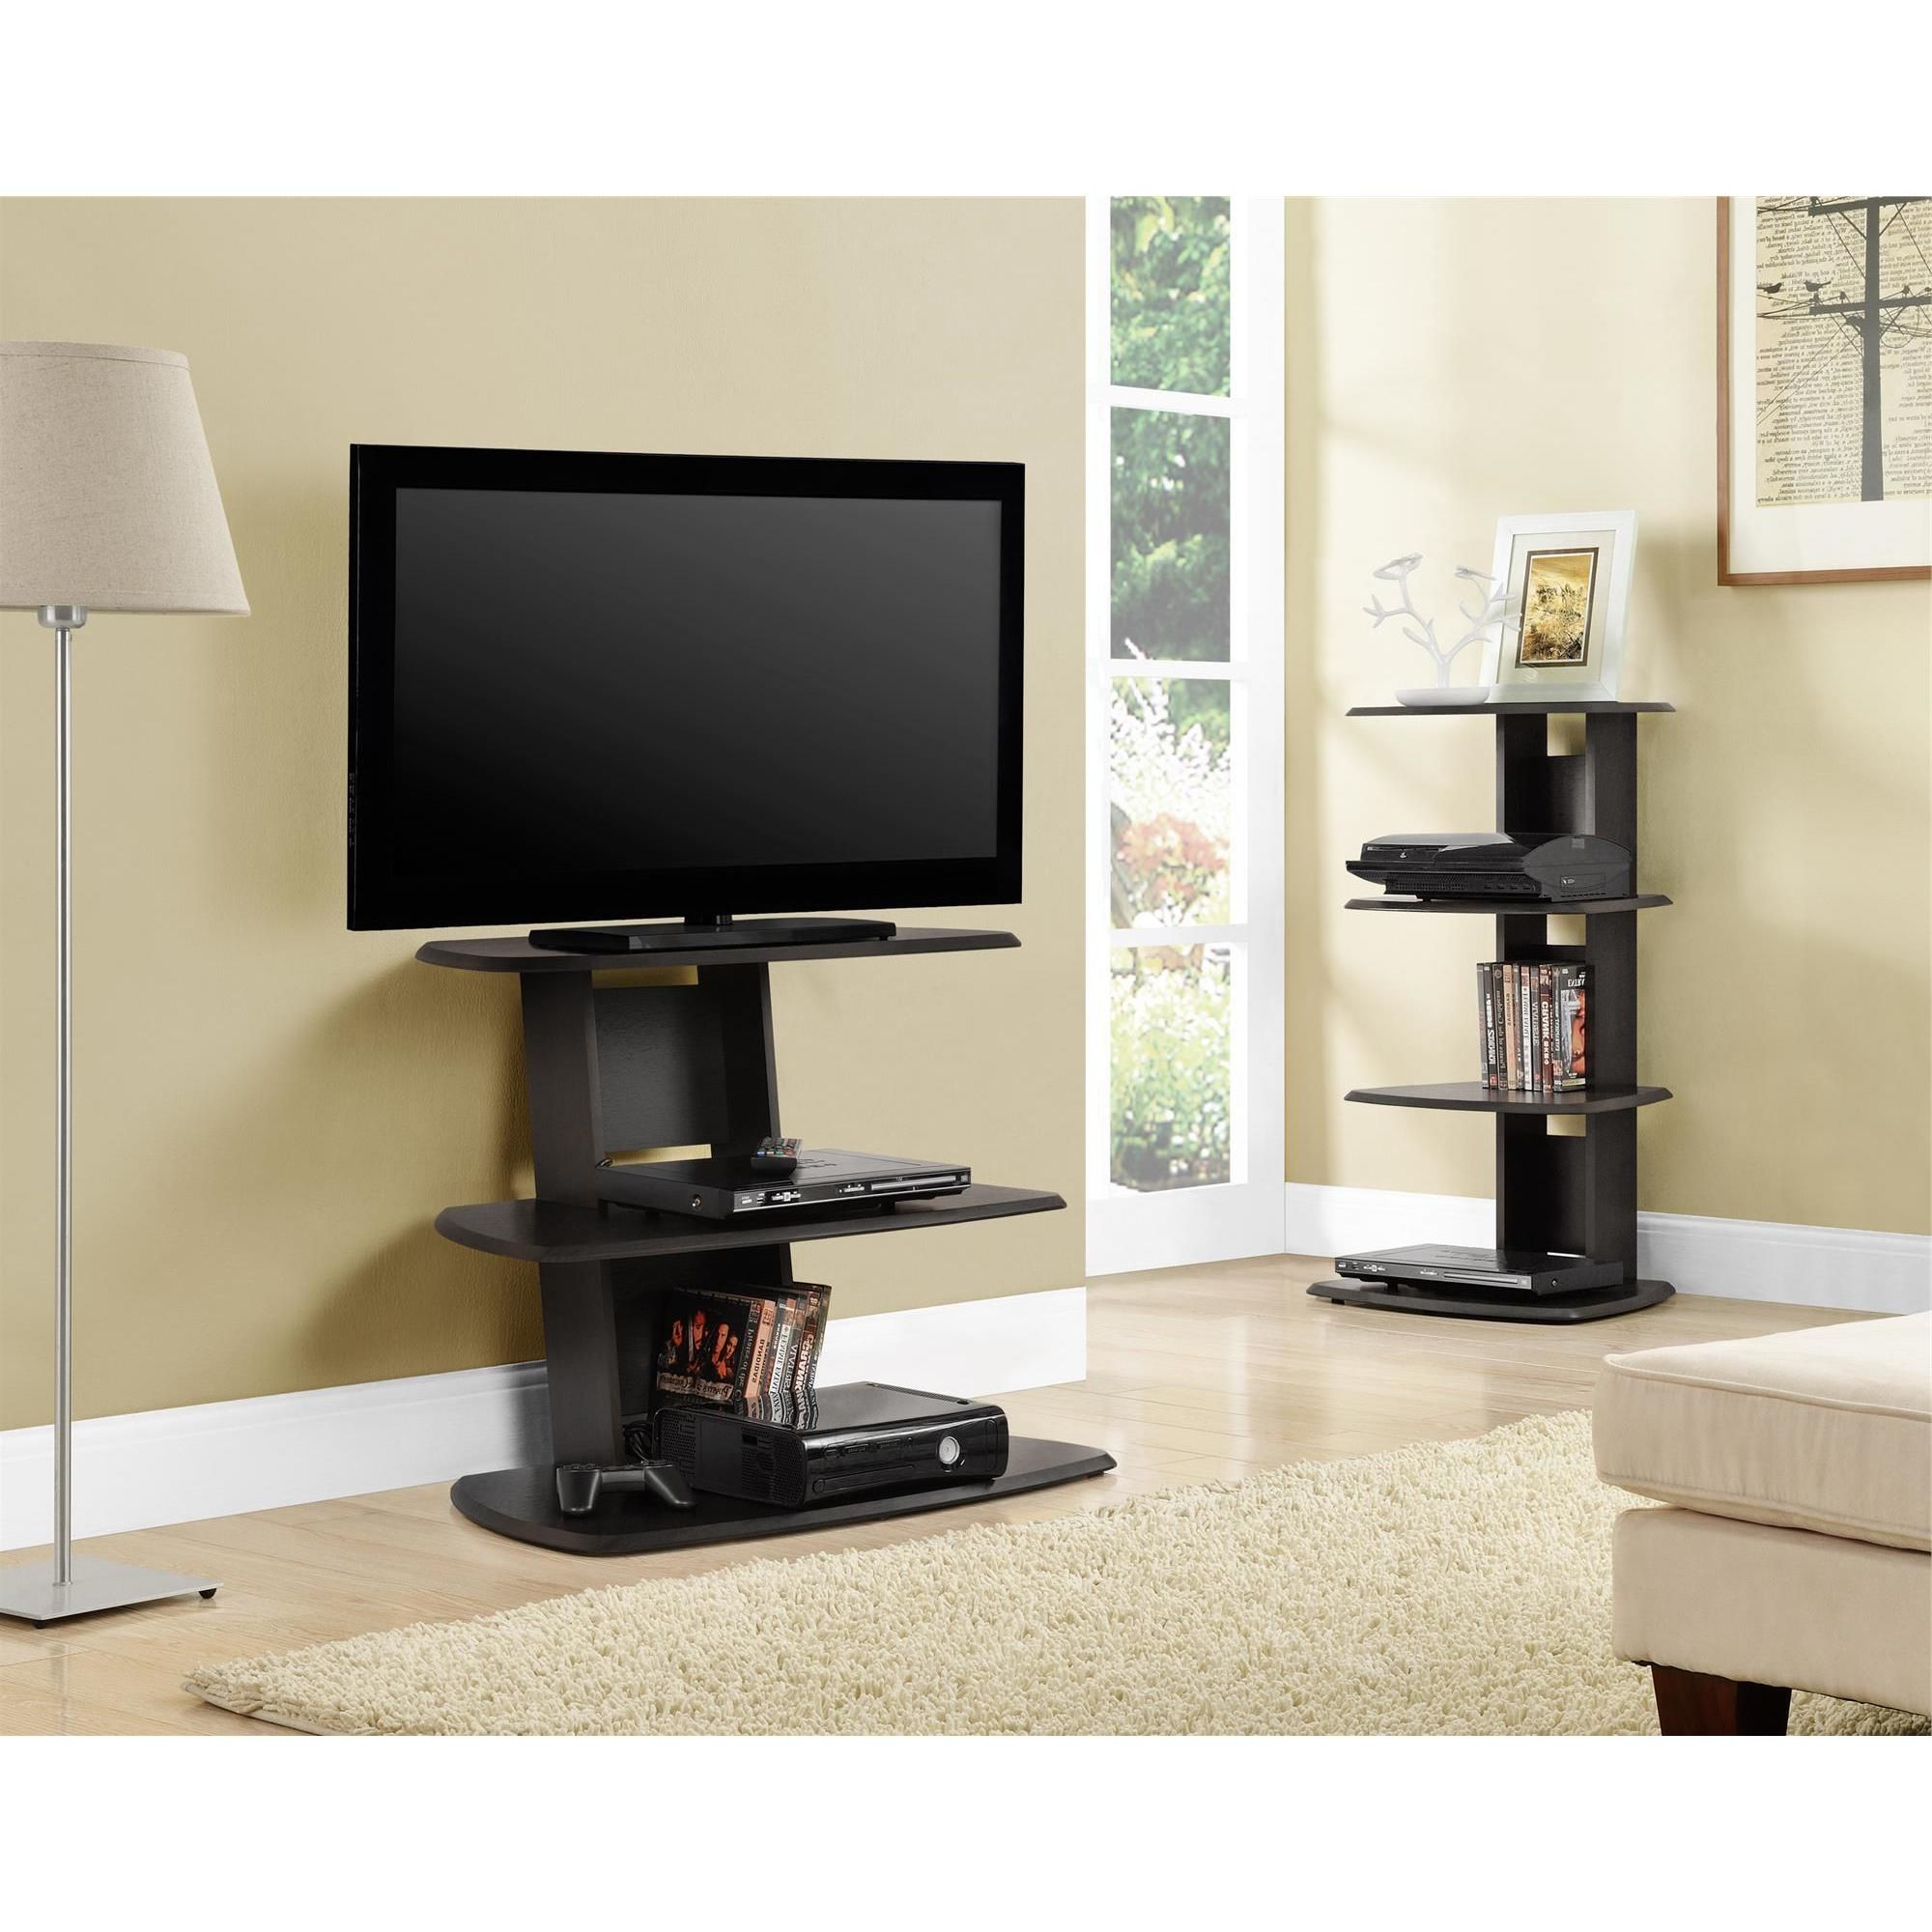 Well Liked 32 Inch Tv Stands Throughout Shop Avenue Greene Crossfield Tv Stand For Tvs Up To 32 Inch Wide (View 1 of 20)